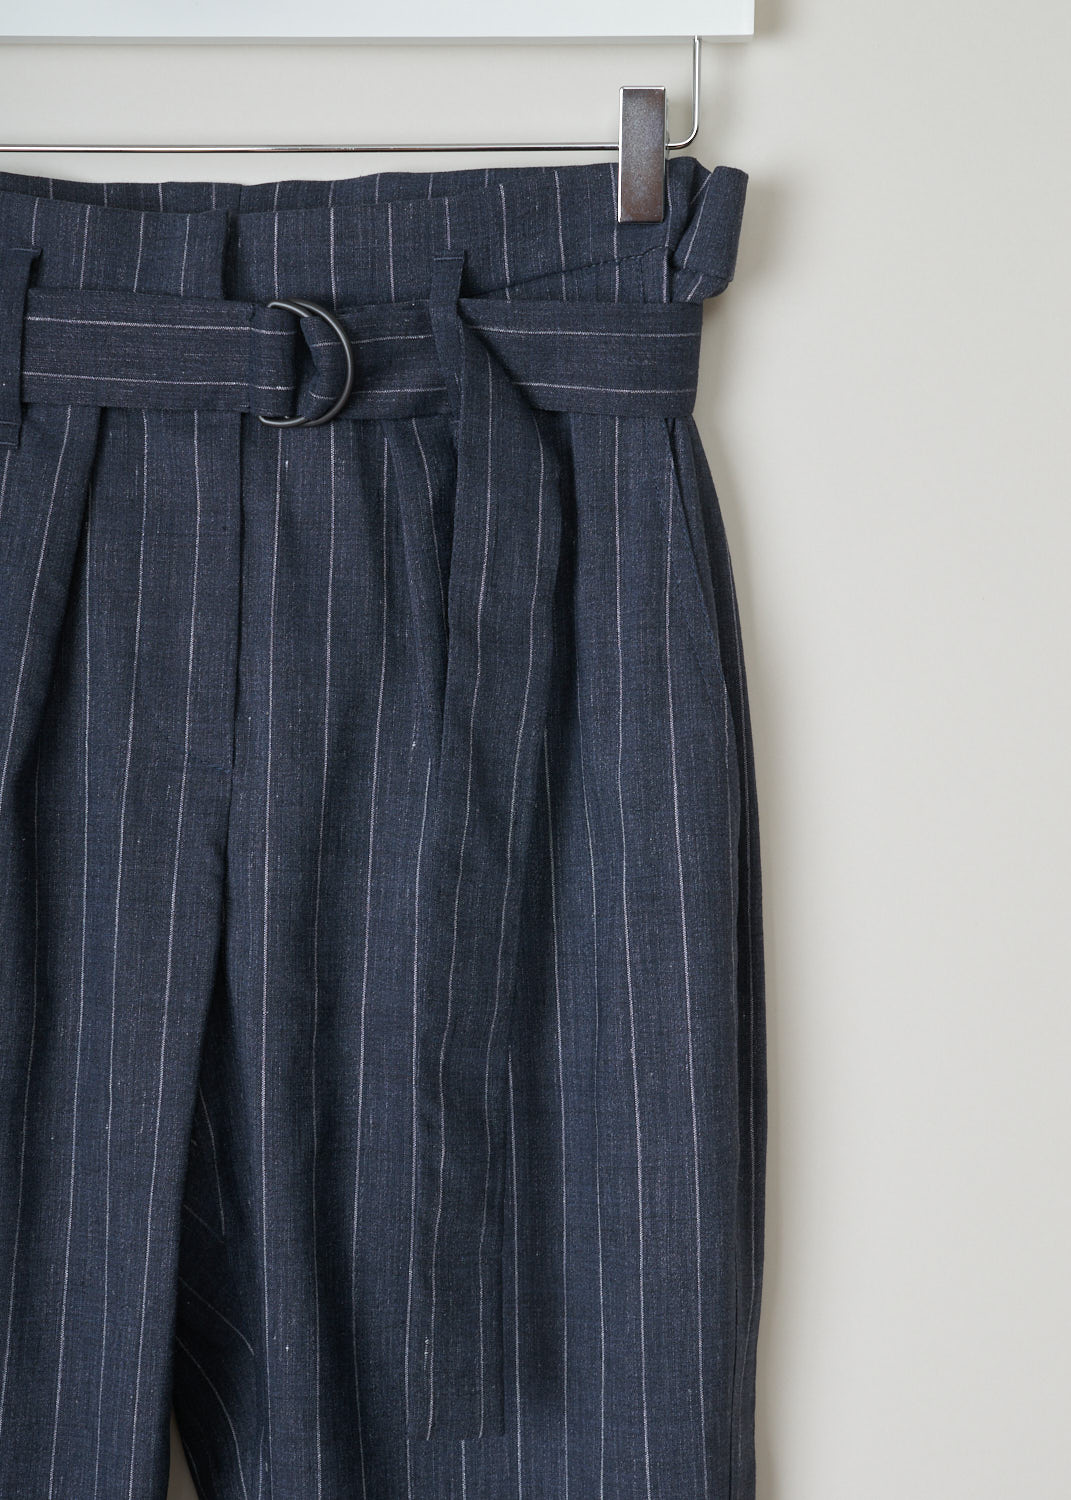 Burnello cucineli, high-waist pinstripe pants, MF554P6588_C003, blue grey, detail, Shaped for a high-waist fit. This paper-bag waist pants is designed with straight cropped legs and soft pleats that fall from the waistband. Comes with matching D-ring belt, slanted side pockets and welt pockets on the back. Fastening option on this model is the D-ring belt plus two metal clips and a backing buttons above the zipper.